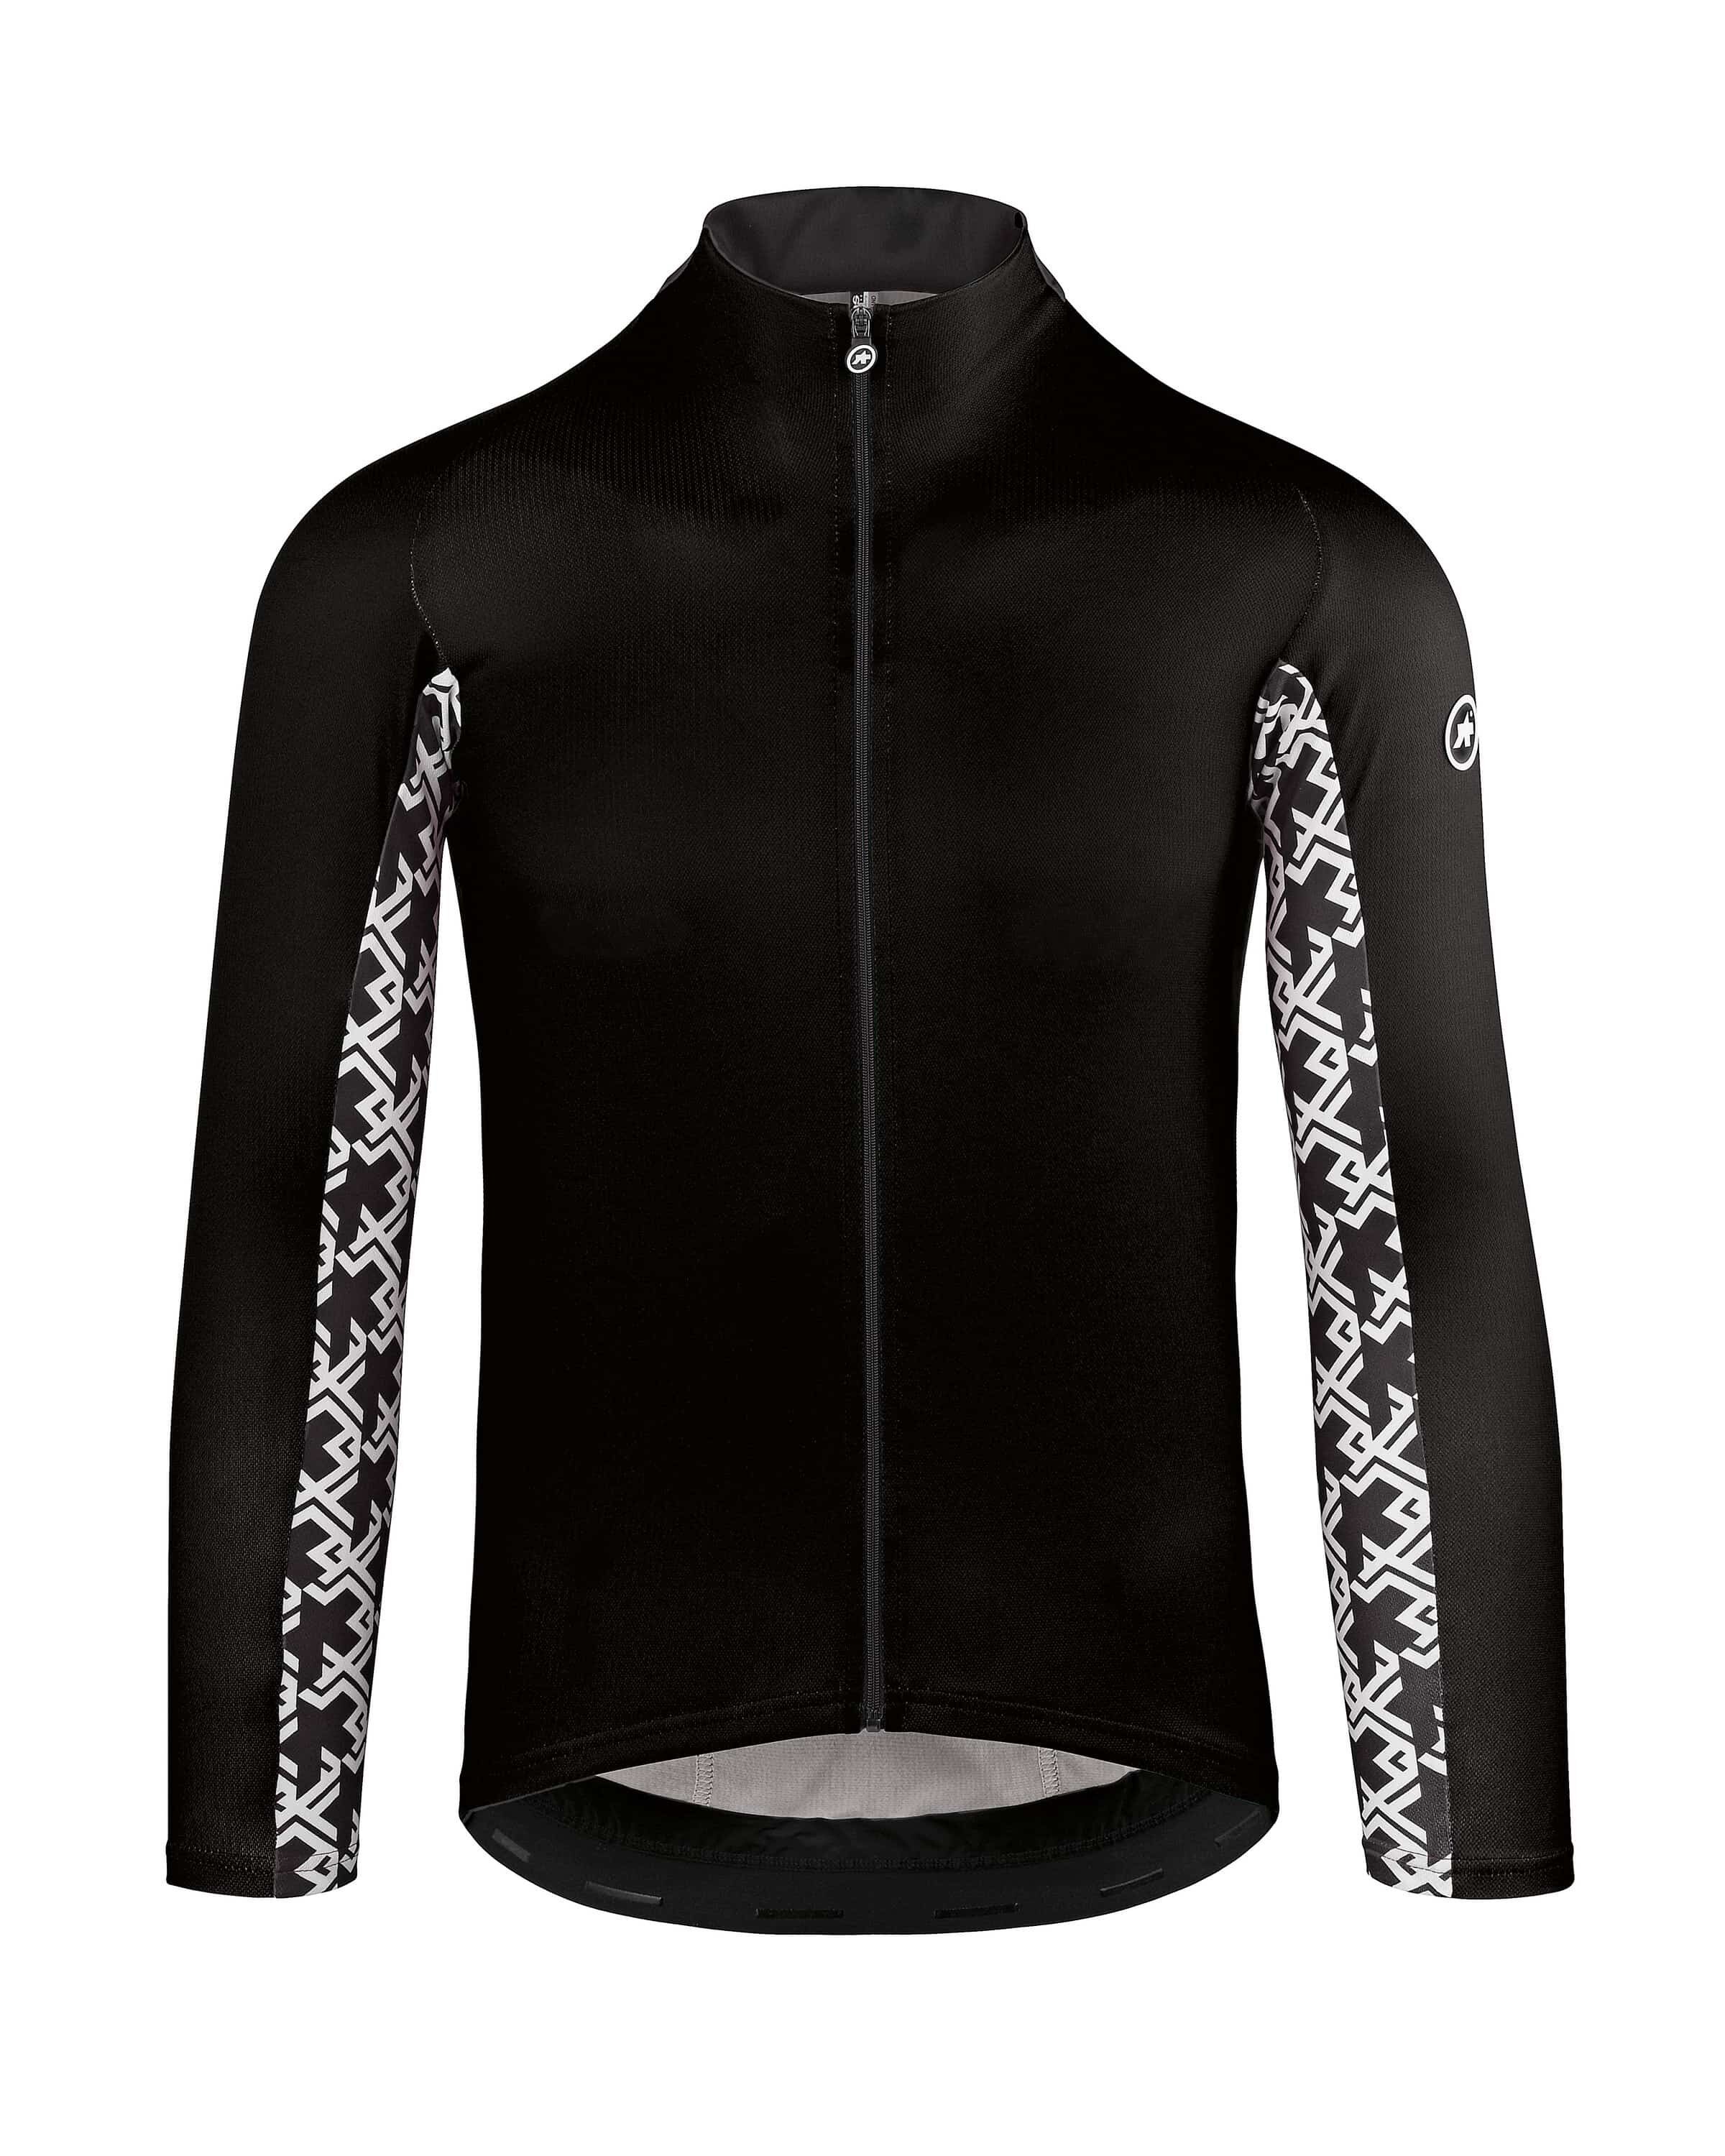 Assos Mille GT LS Jersey - Maglia ciclismo - Uomo